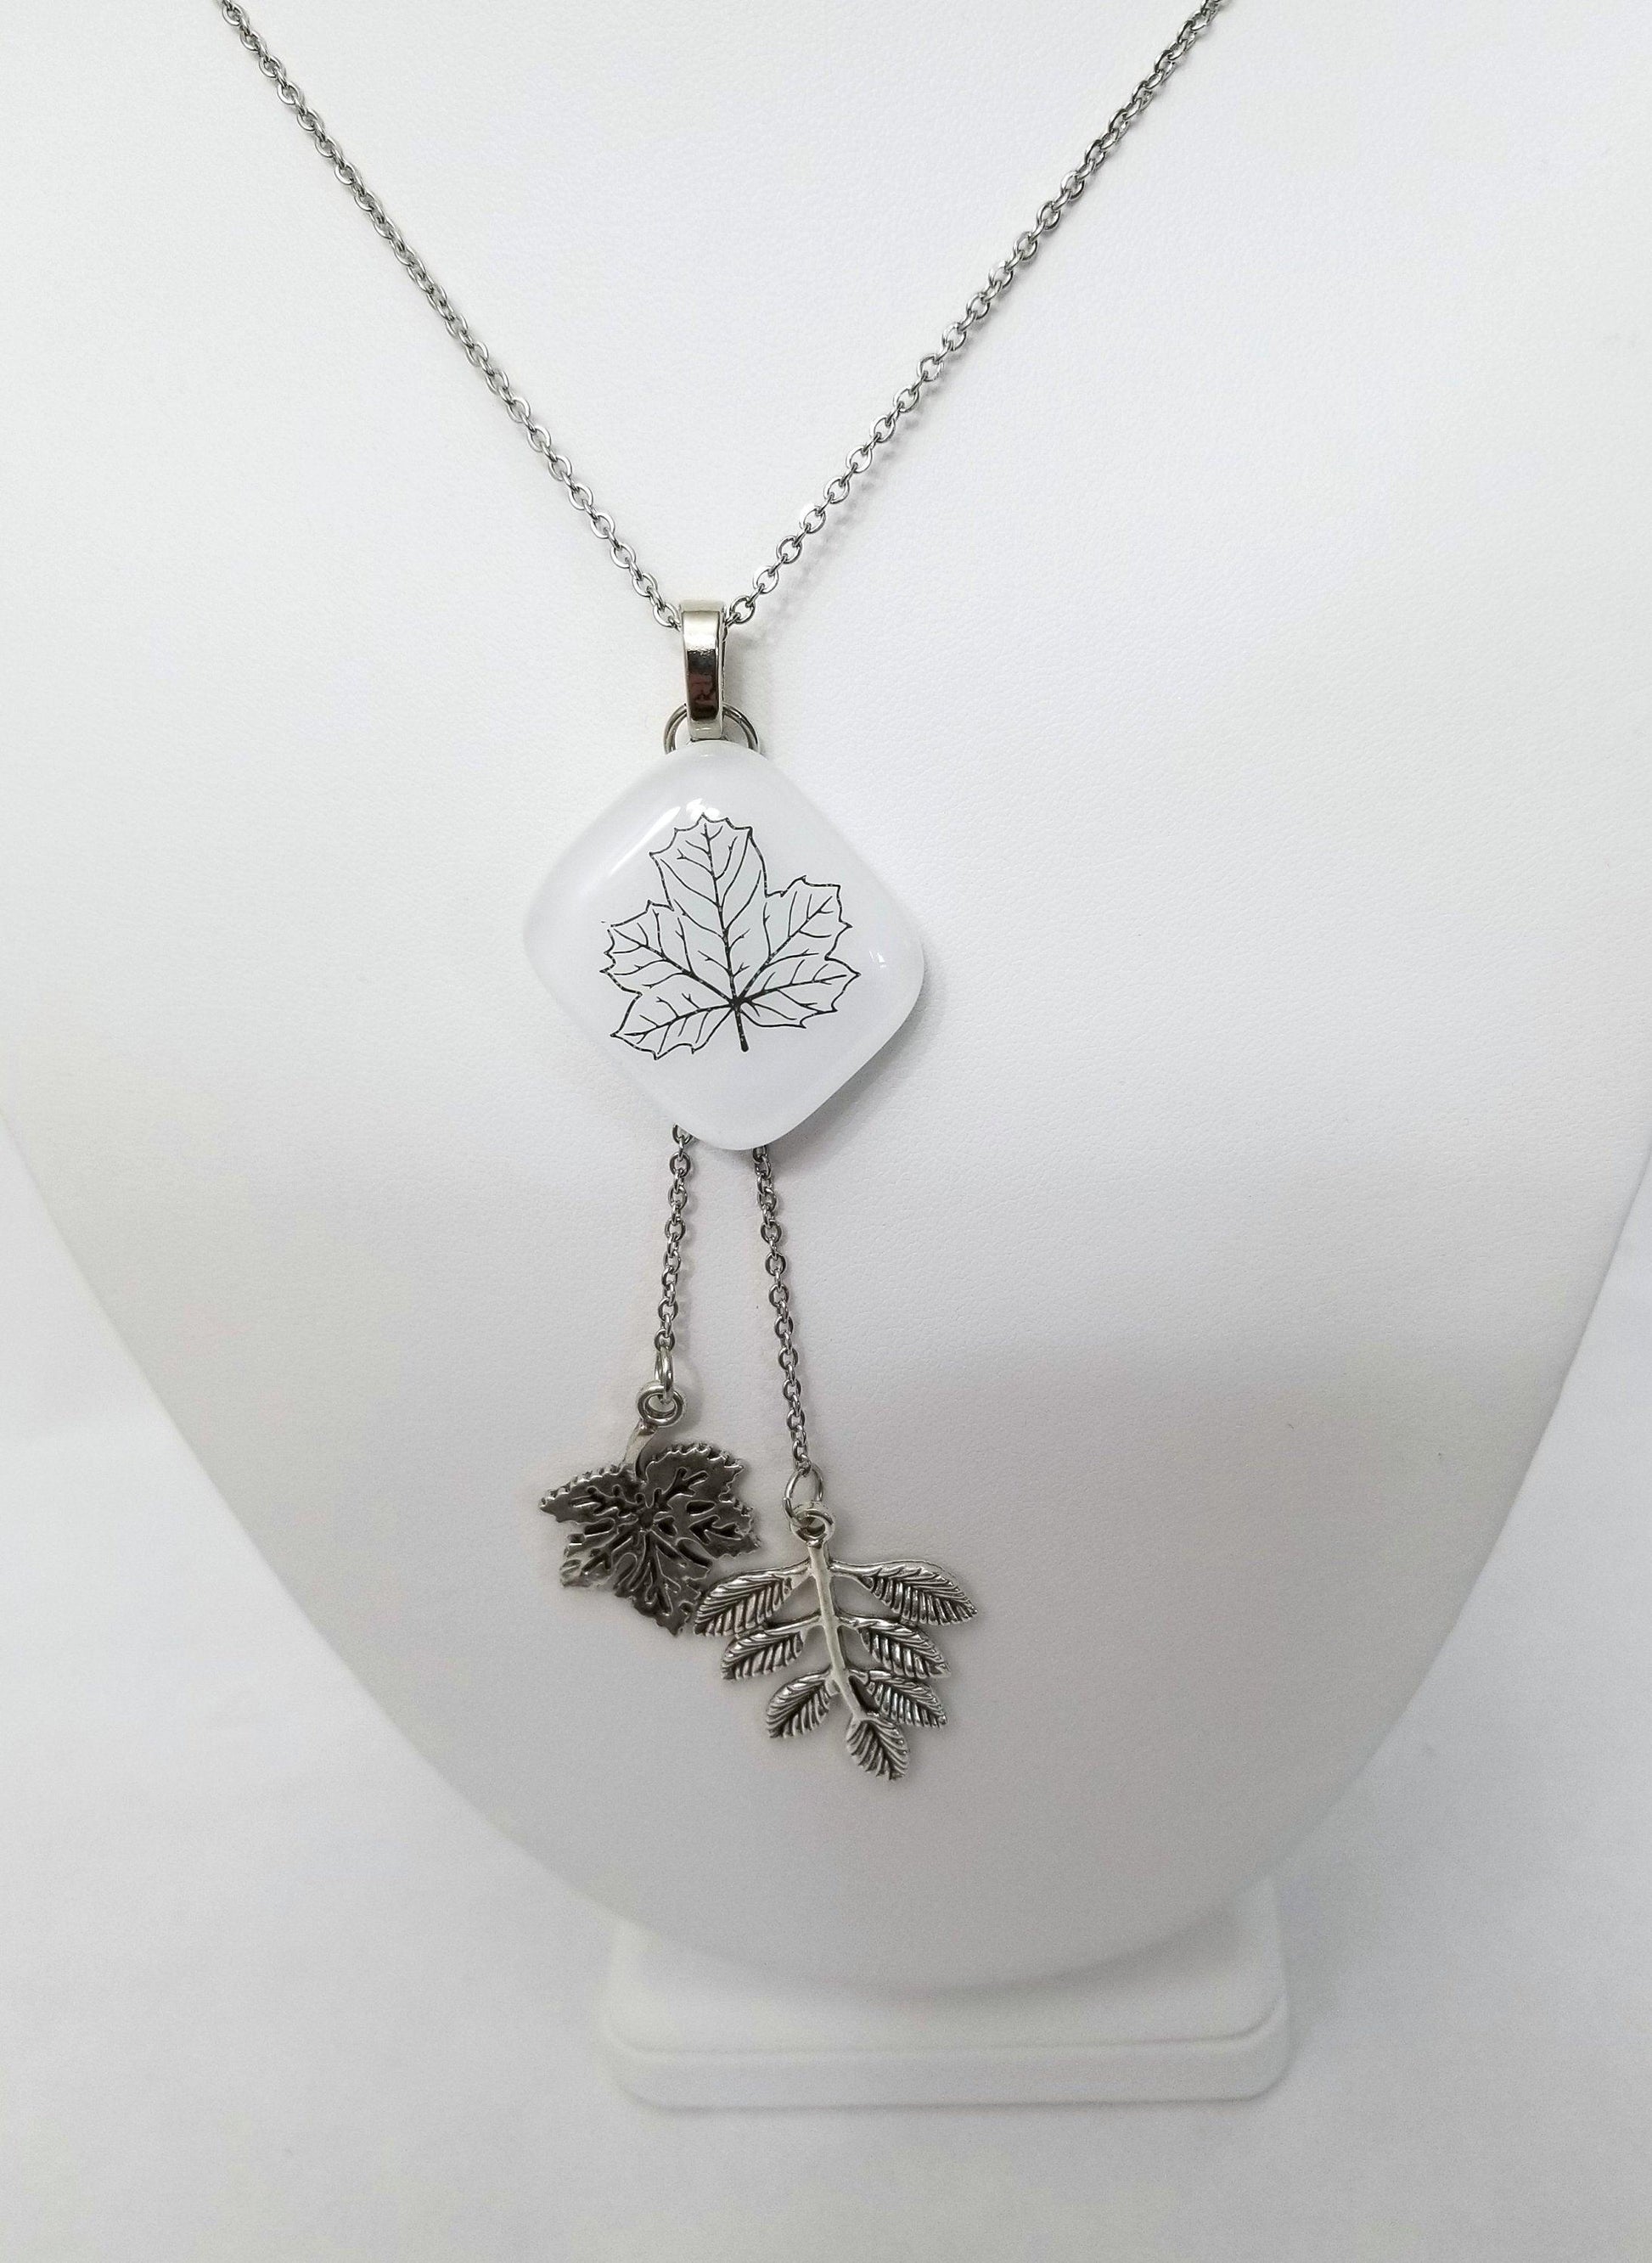 Leaf Nature Necklace, Fused Glass and Stainless steel chain and leaves seeds glassworks seedsglassworks